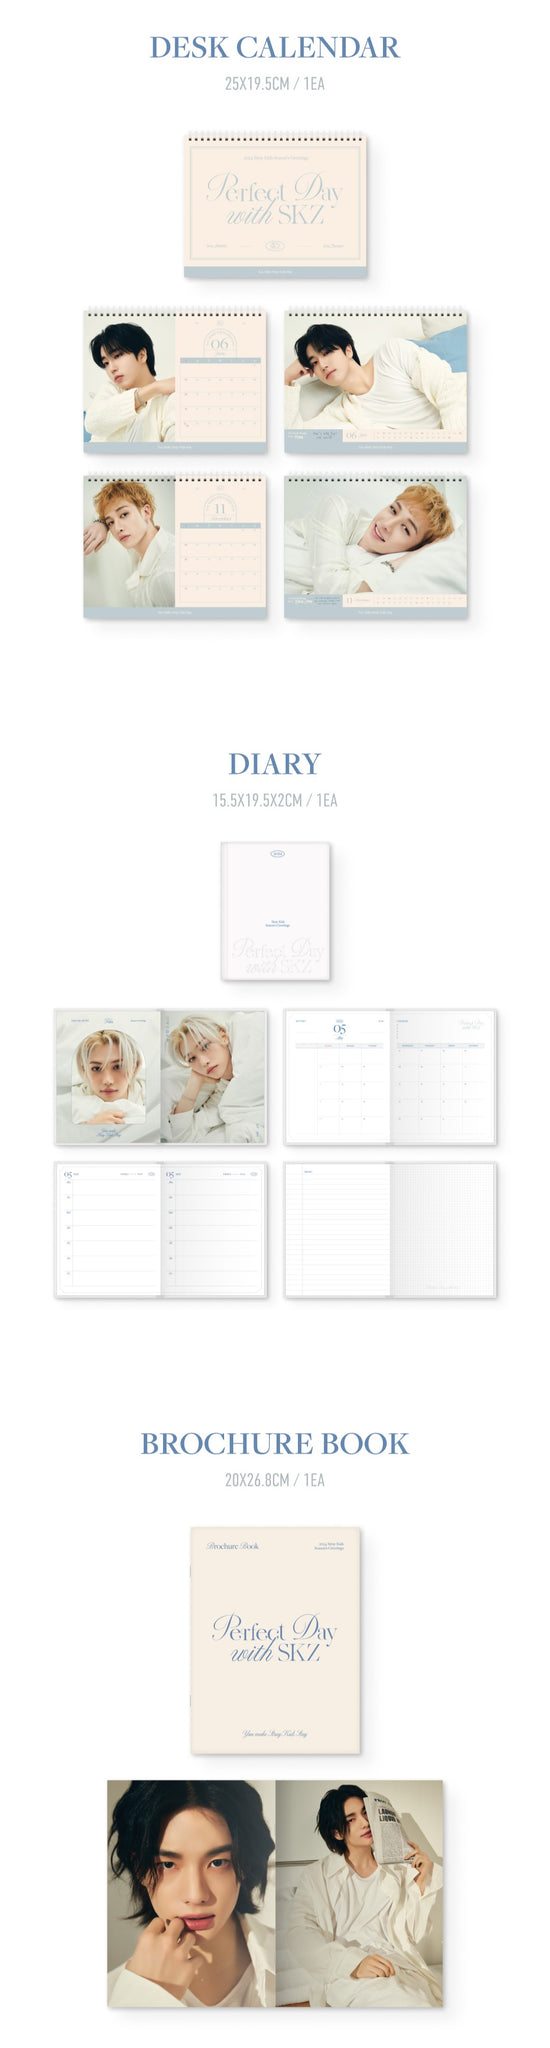 Perfect Day with SKZ Inclusions Desk Calendar Diary Brochure Book